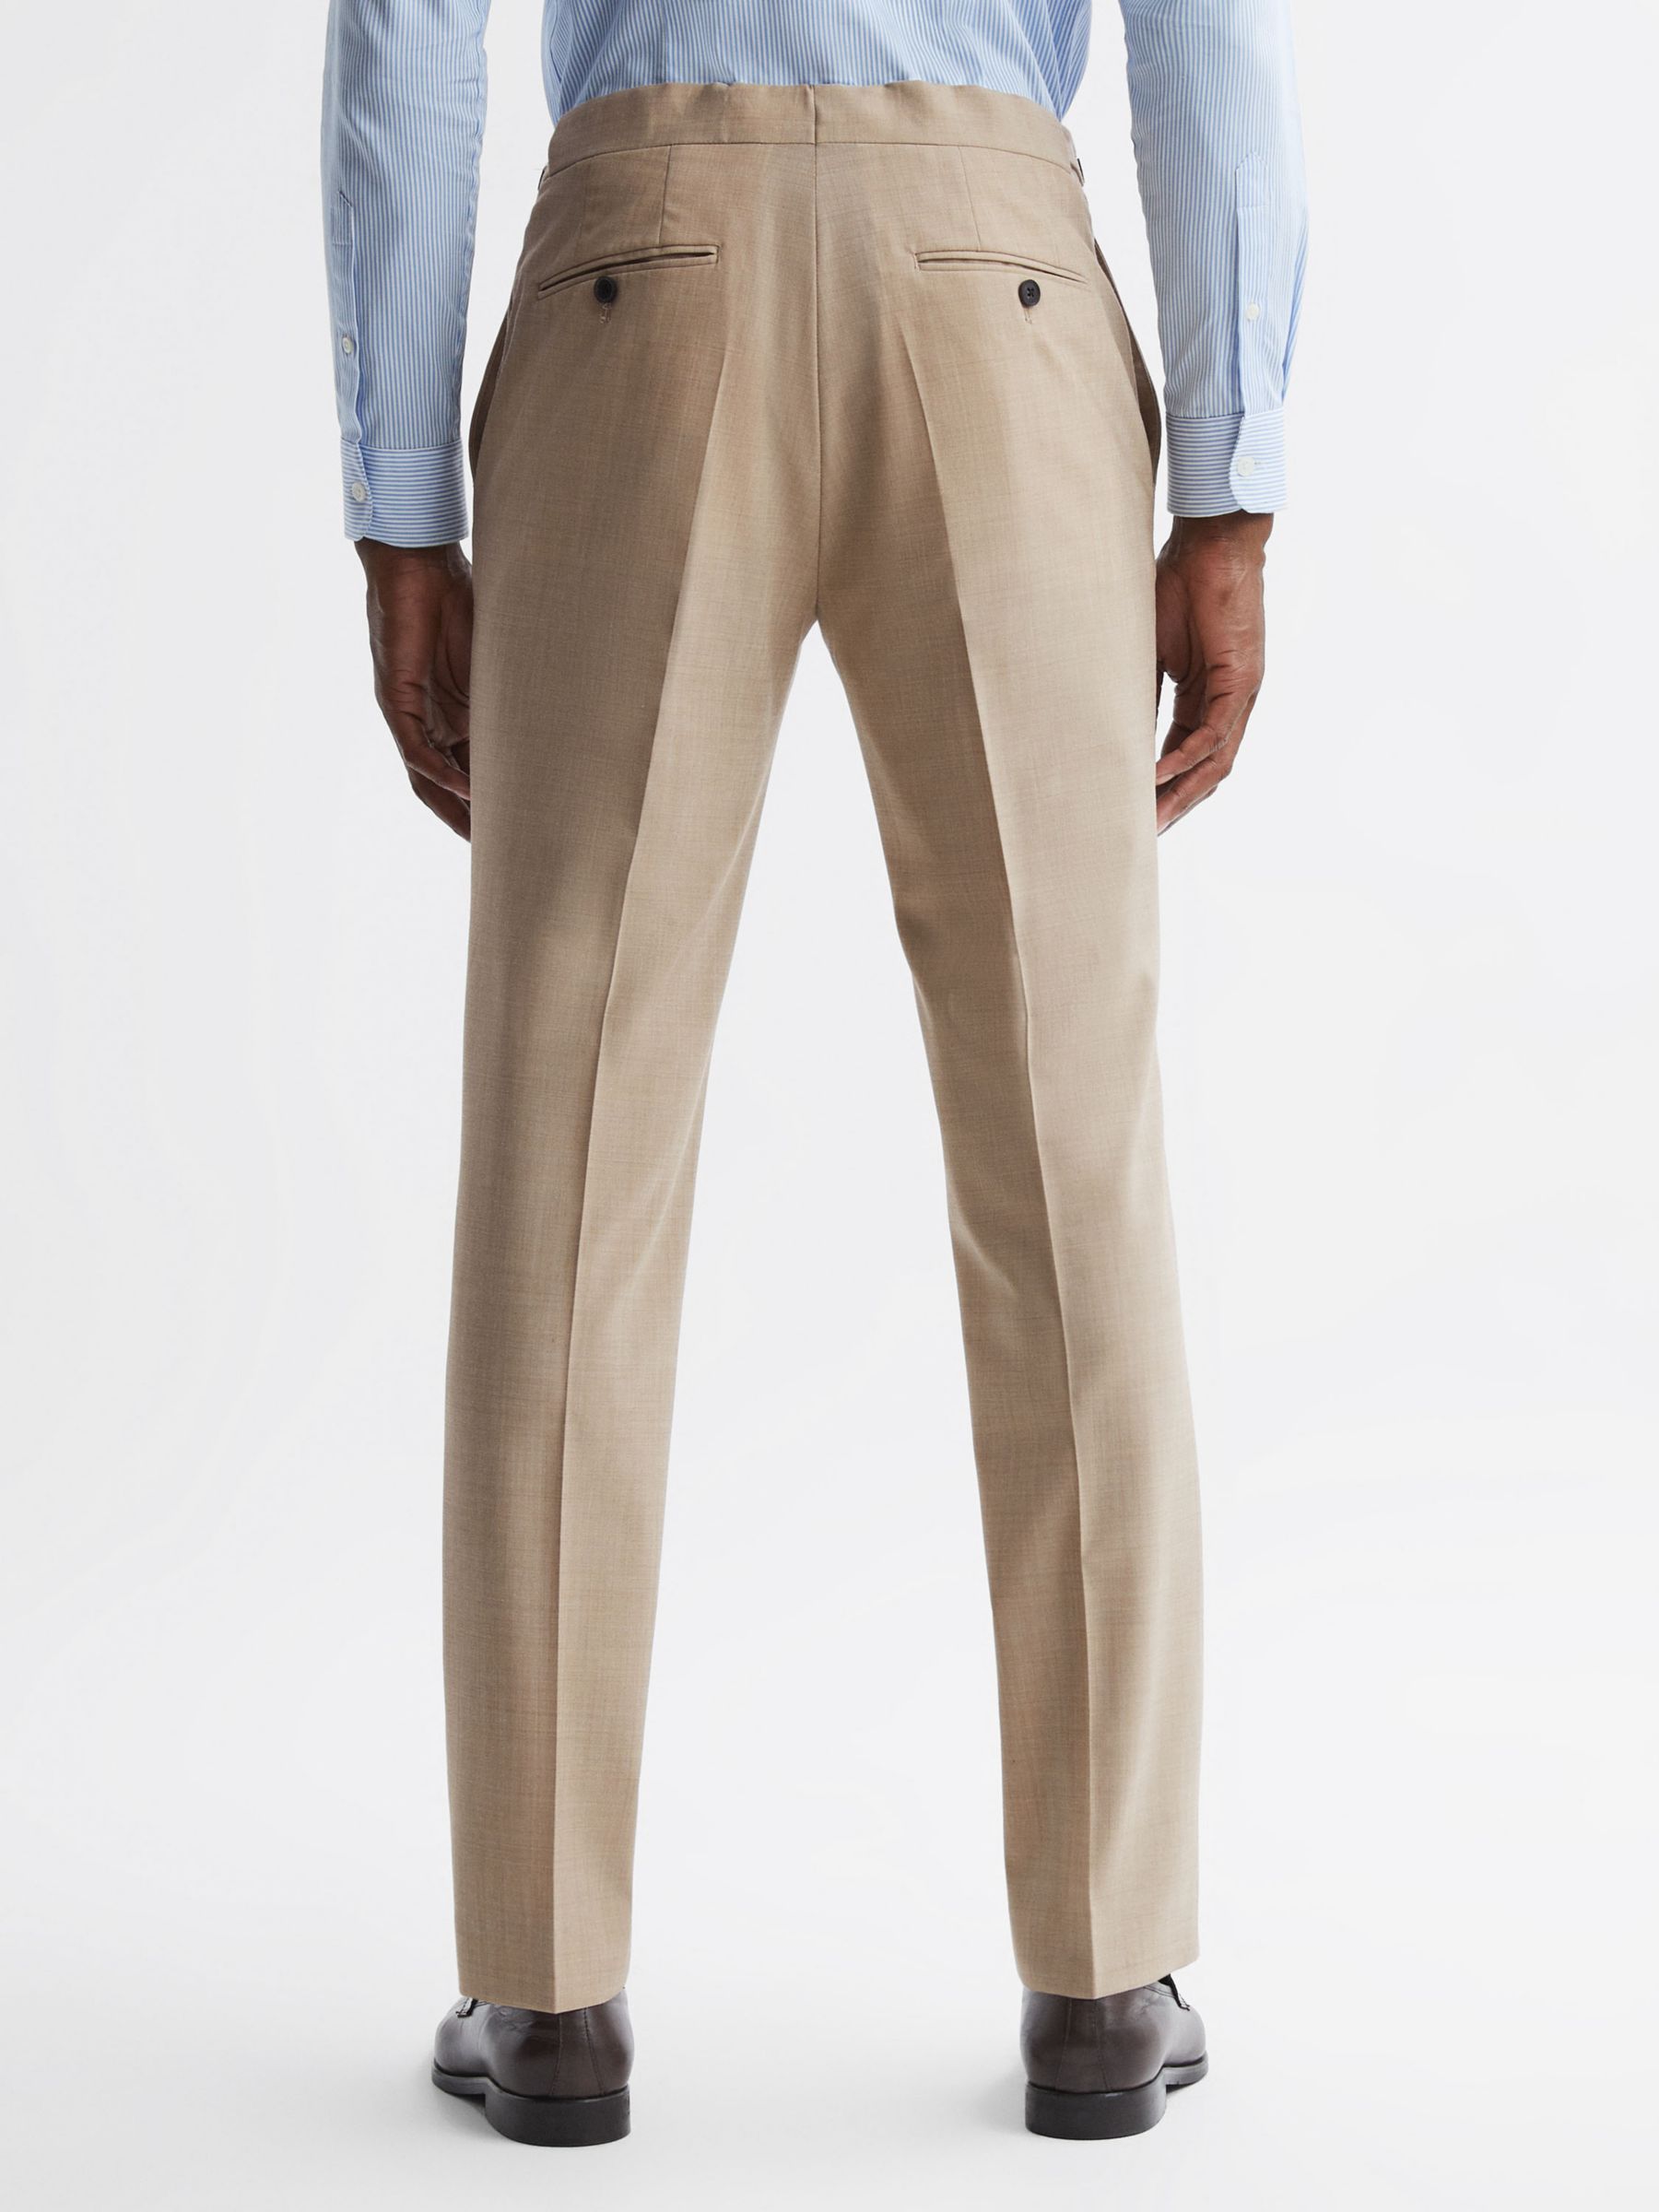 Buy Reiss Wish Wool Mix Trousers Online at johnlewis.com